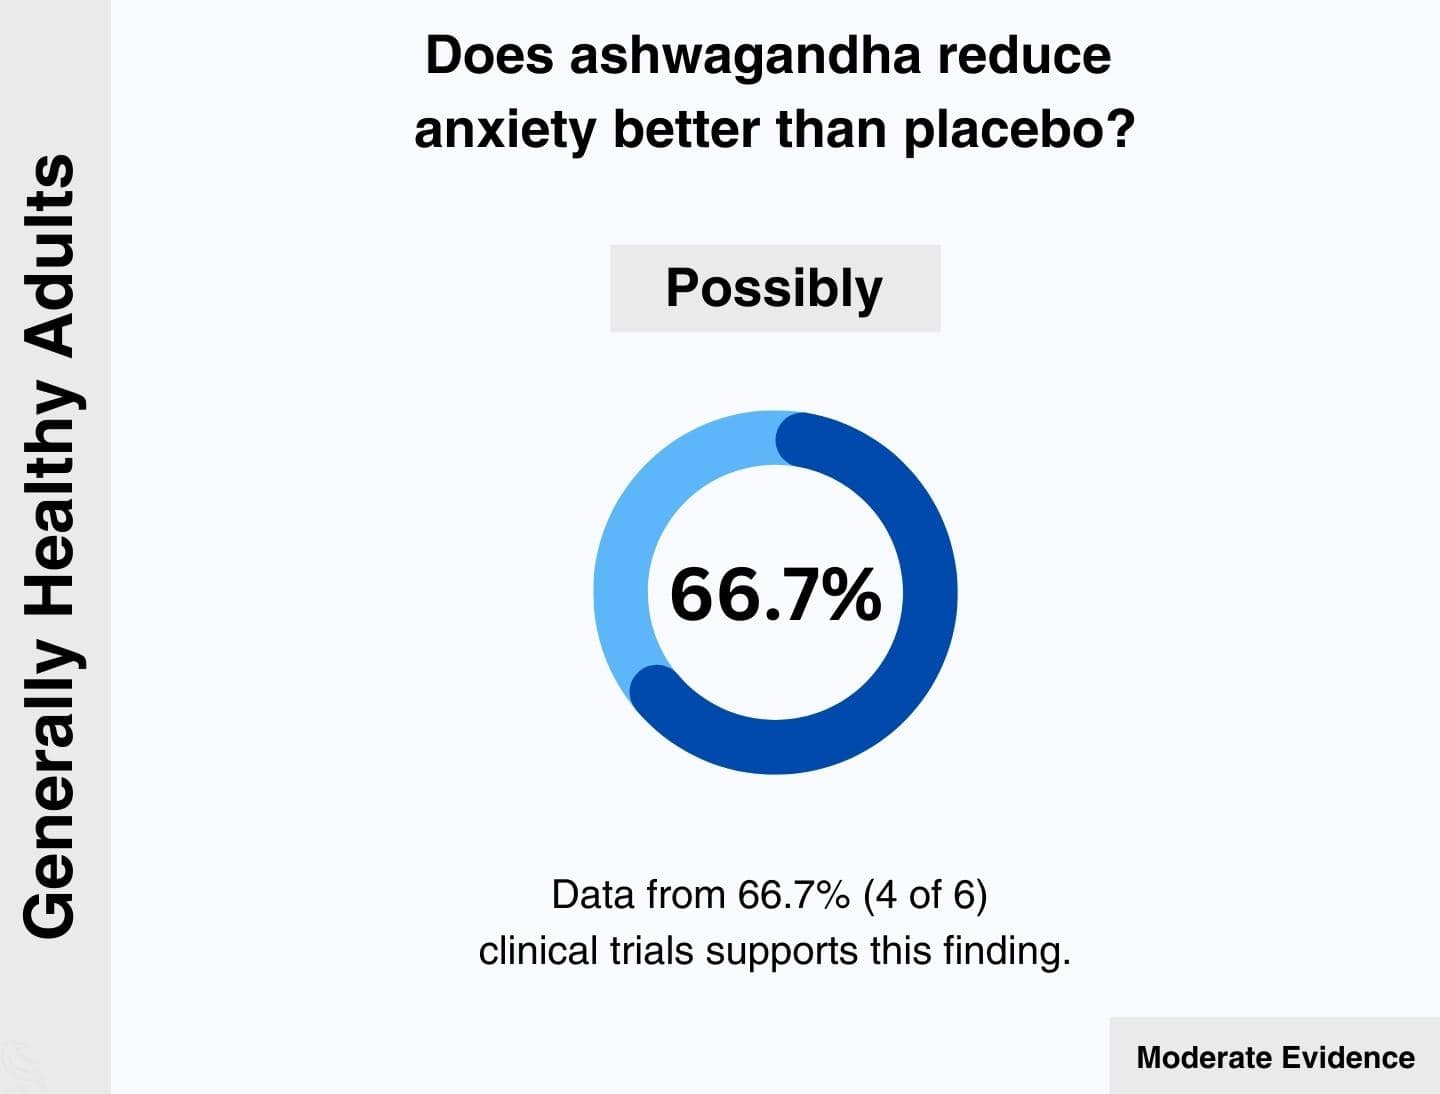 This image shows that 66.7% (4 of 6) clinical trials found that ashwagandha might reduce anxiety significantly better than placebo in generally healthy adults.